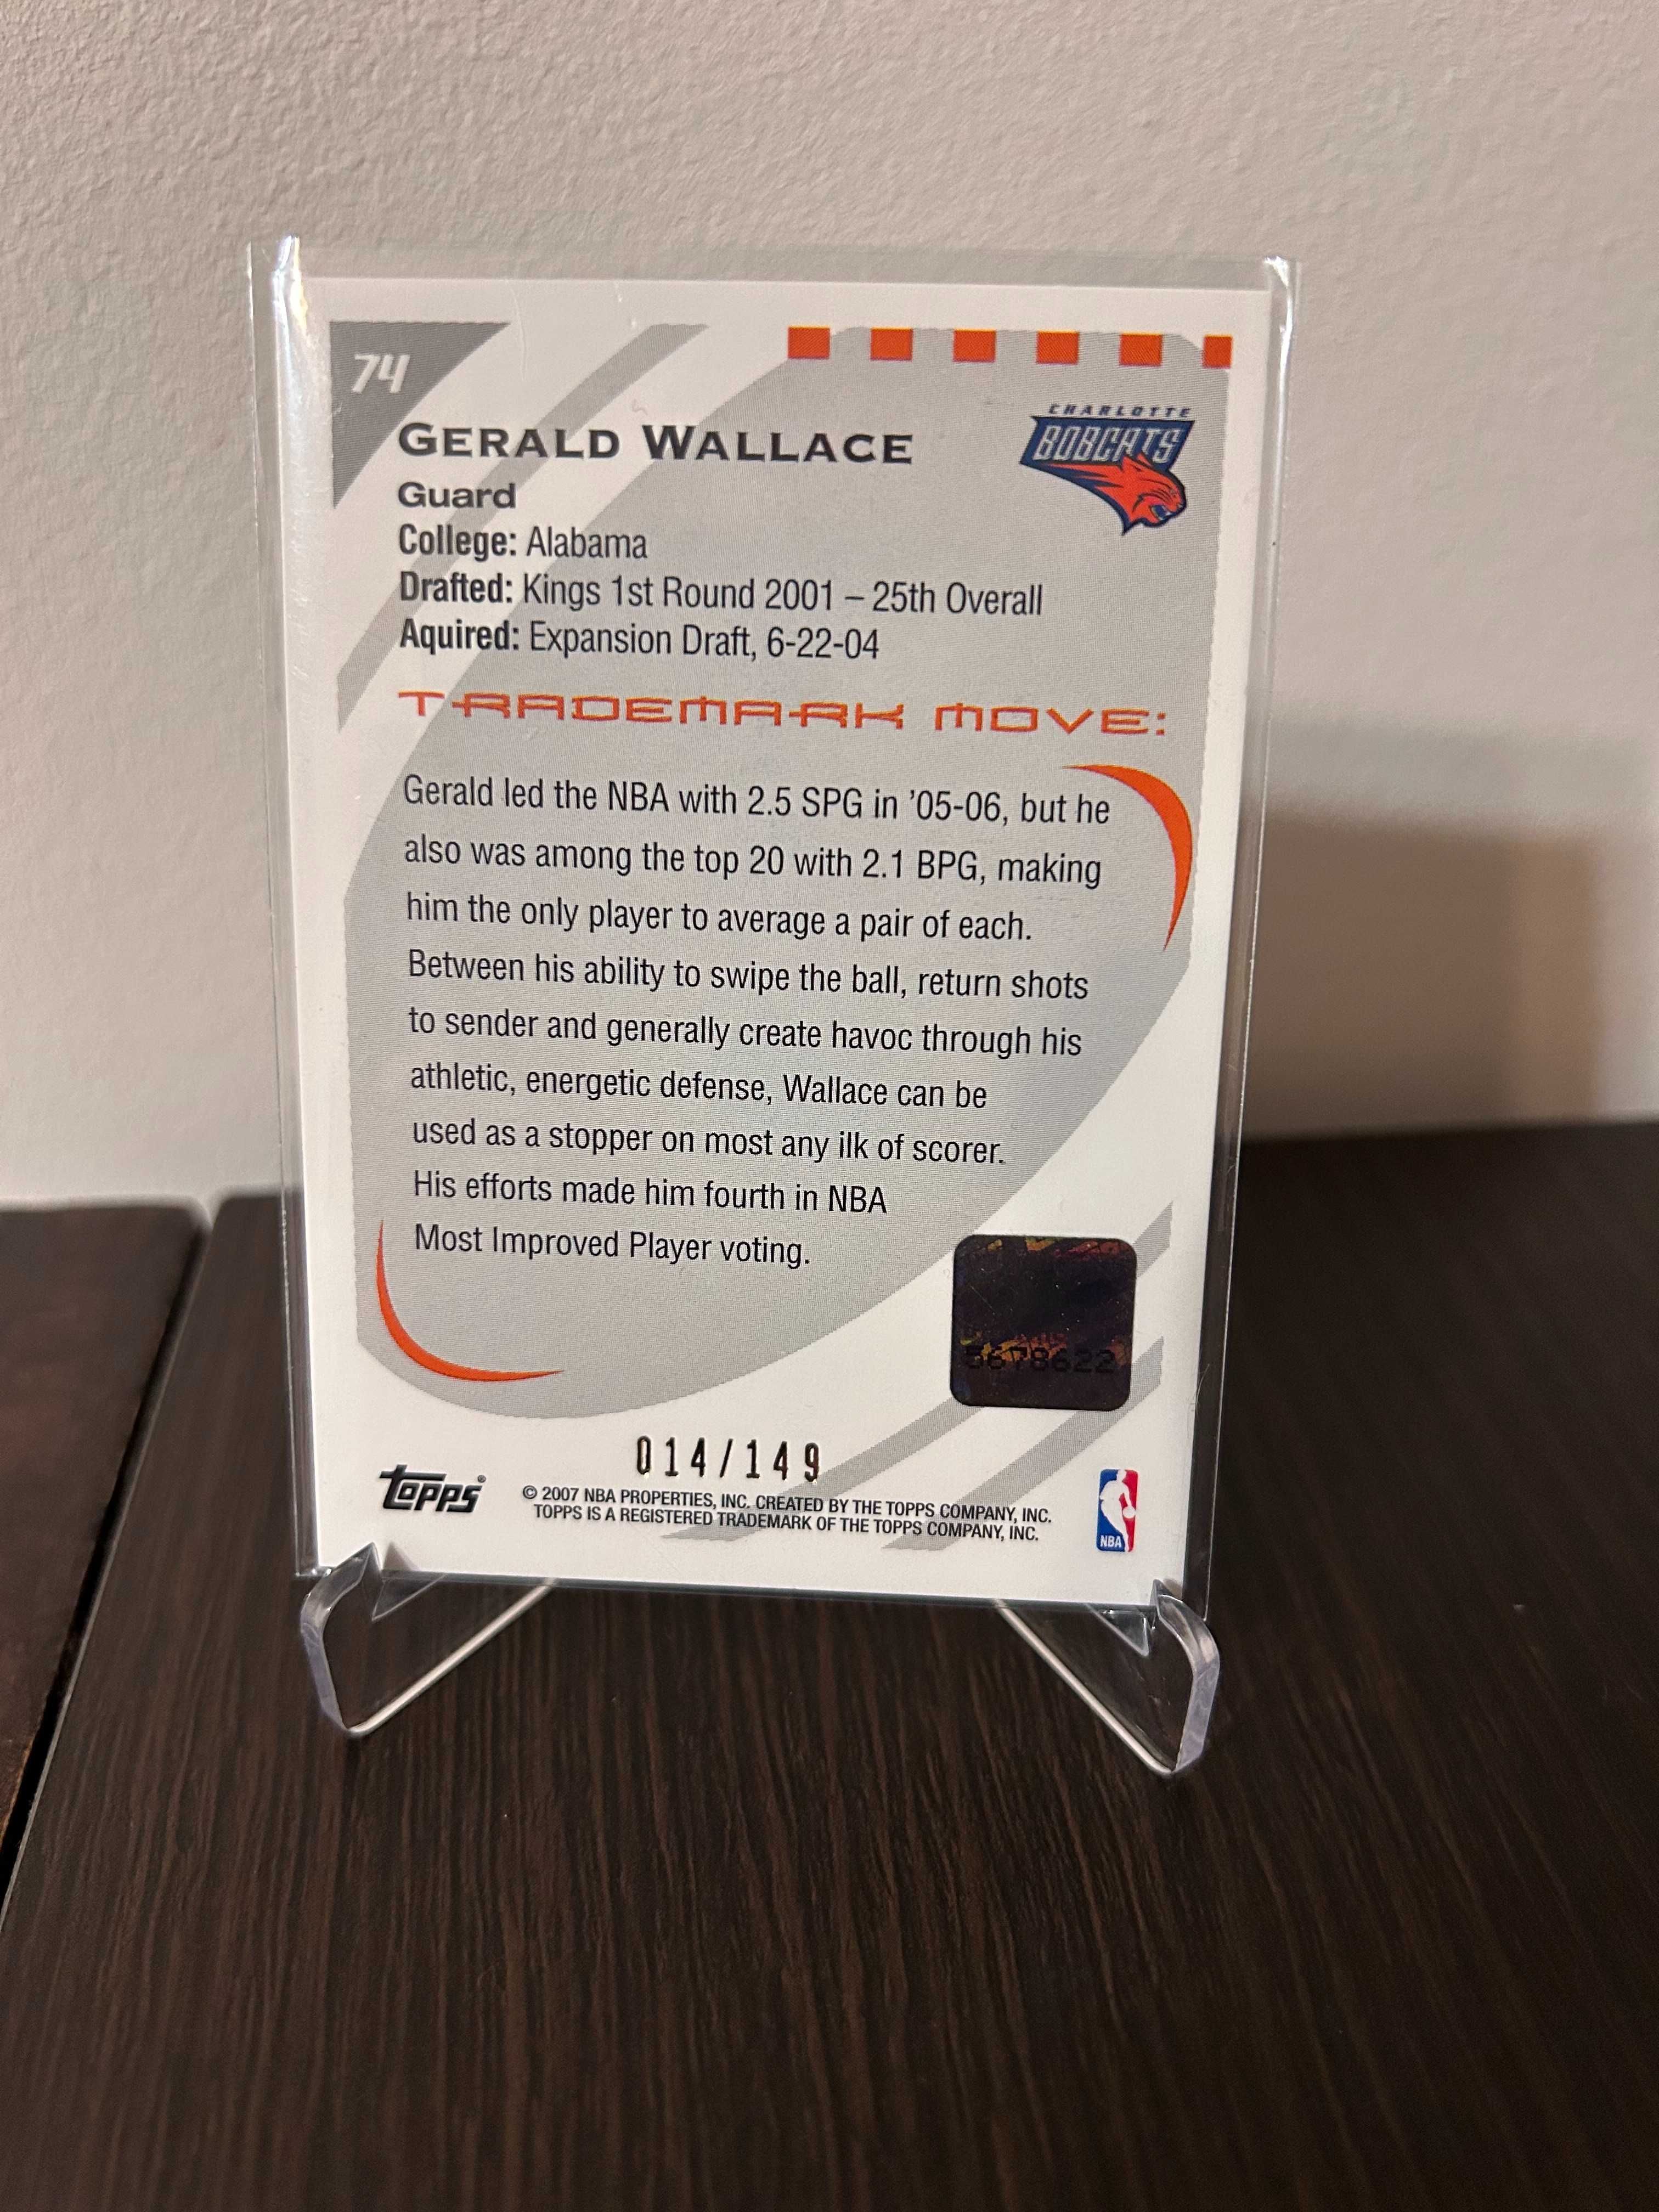 2006-07 Topps Autograf Gerald Wallace